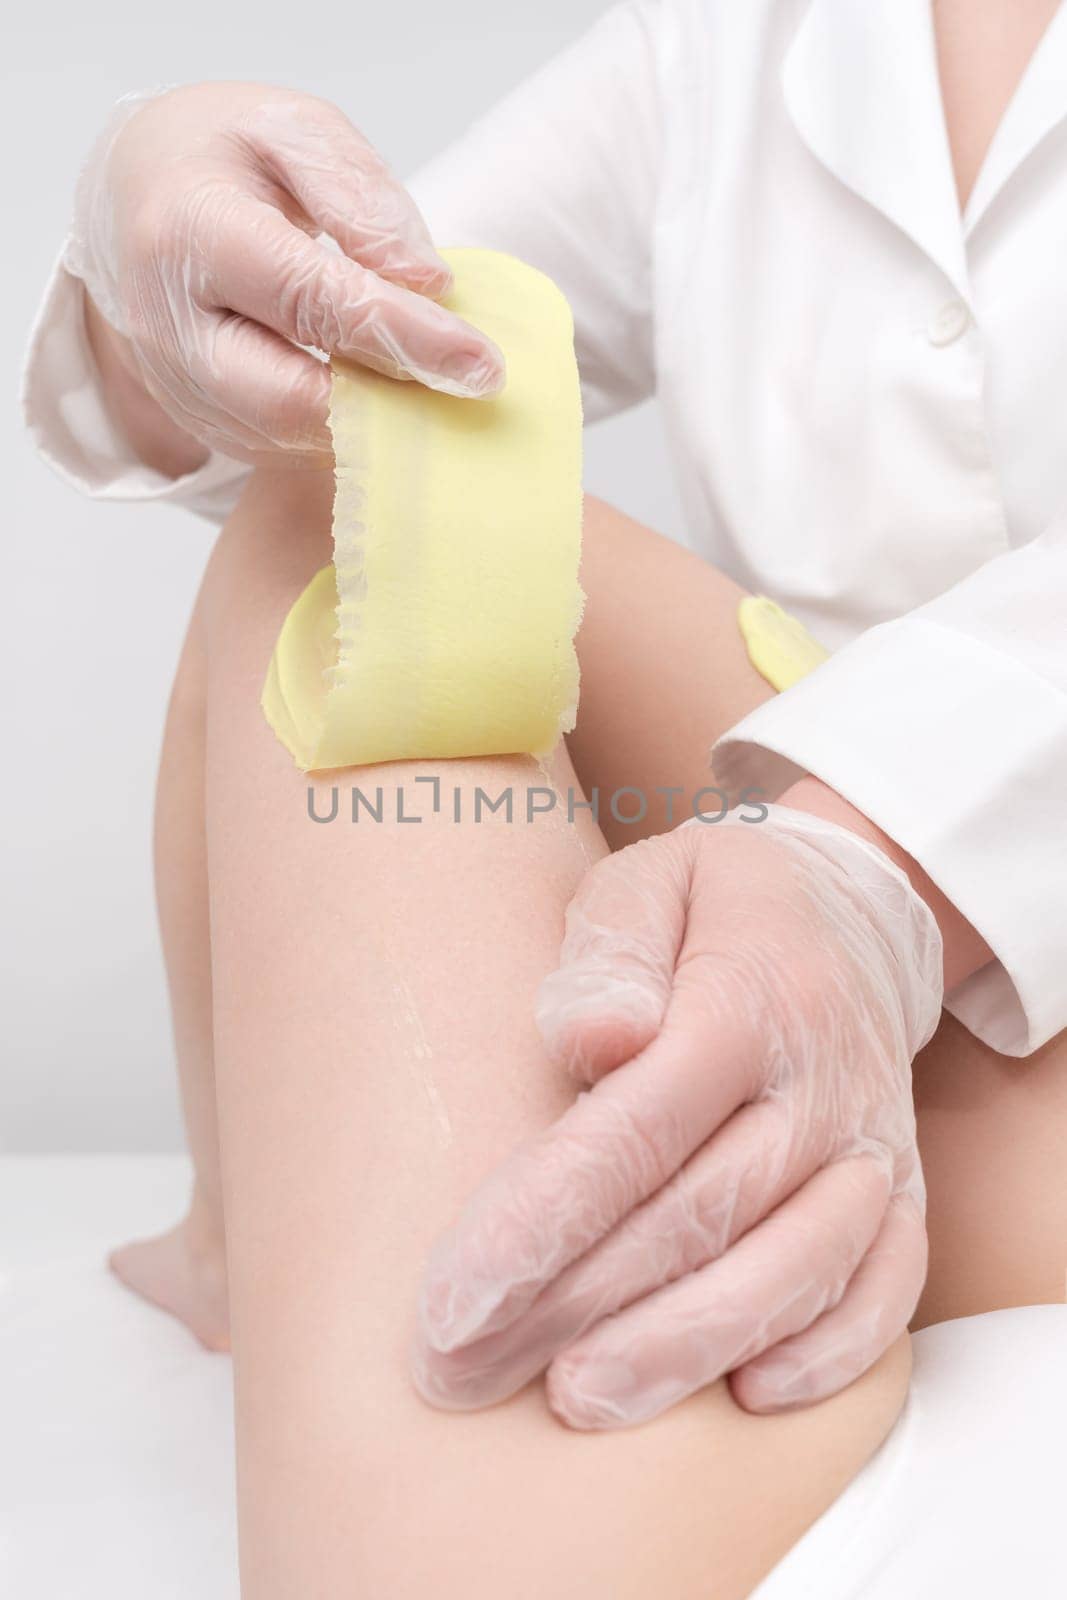 Depilation procedure - cosmetologist hands in gloves removing hair on women leg. Waxing process with green hot wax in professional beauty salon. Part of photo series.